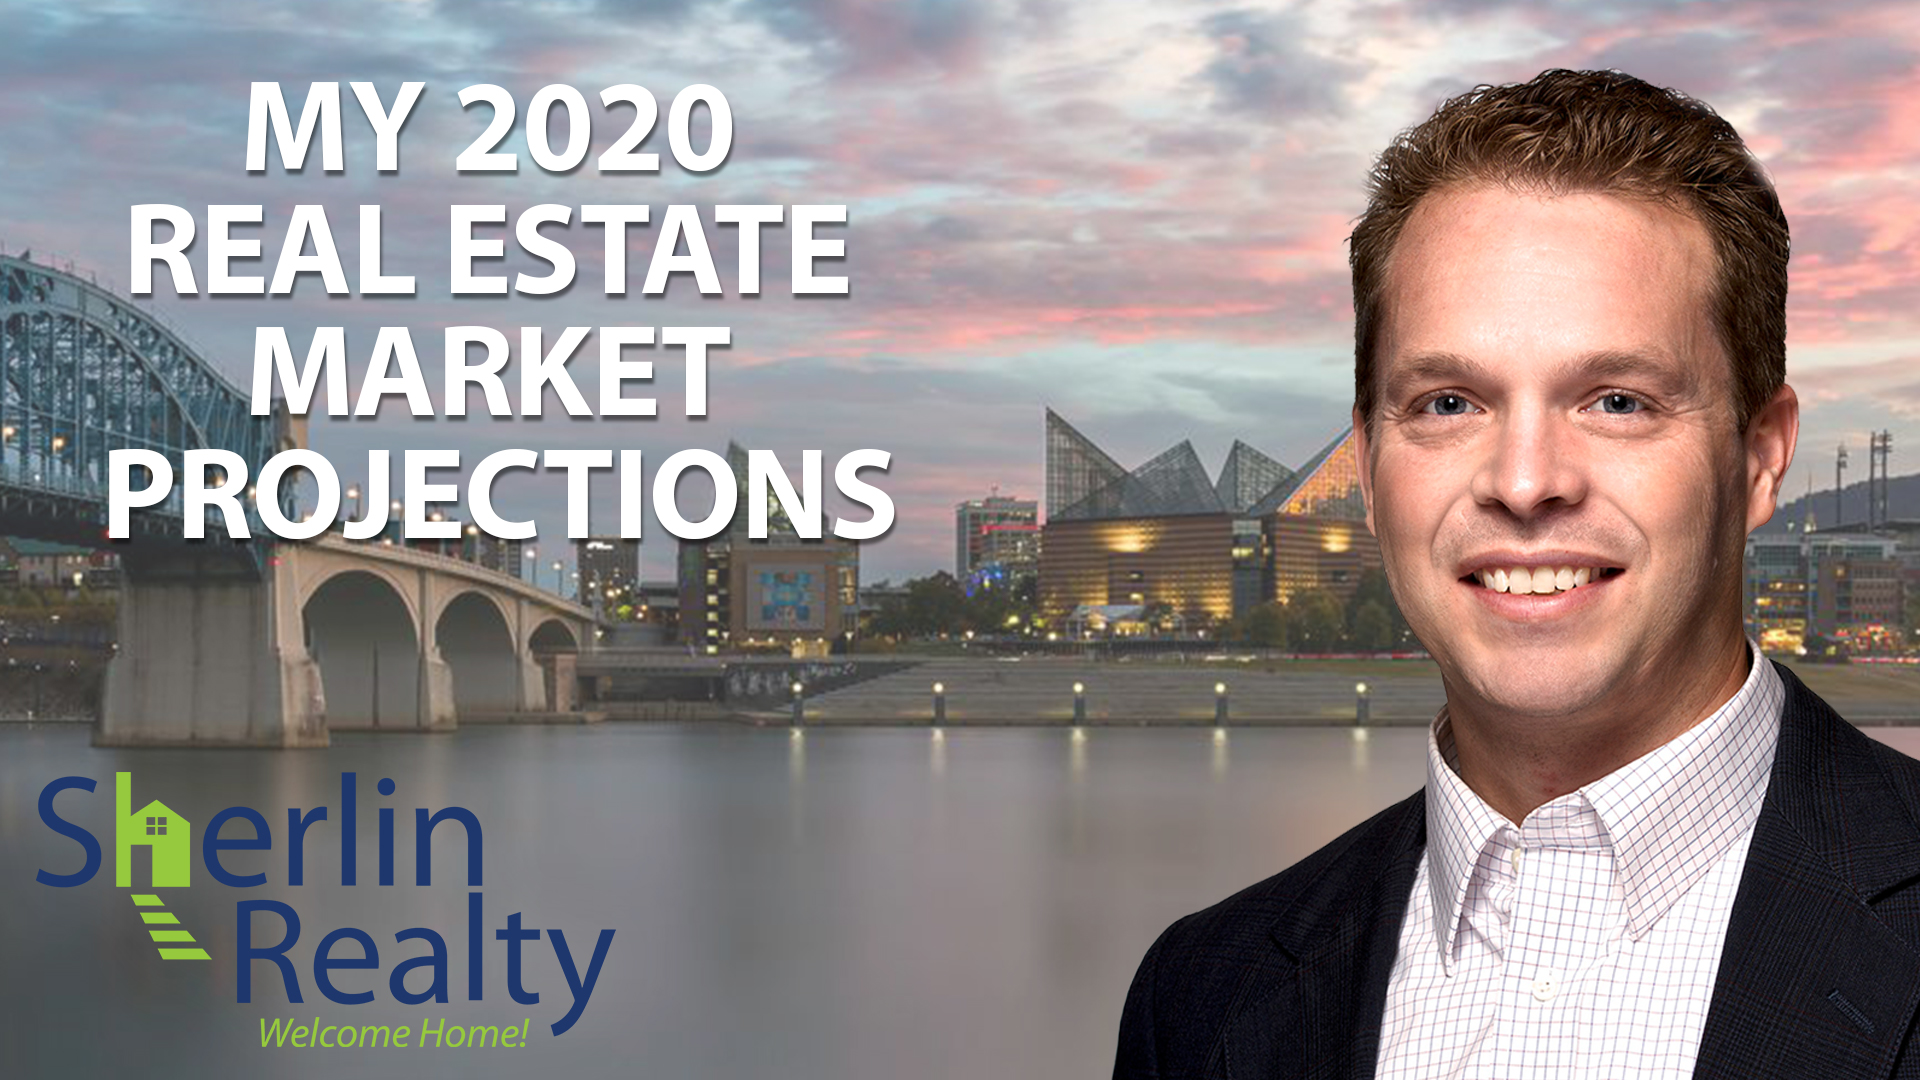 What Can You Expect From Our Market in 2020?